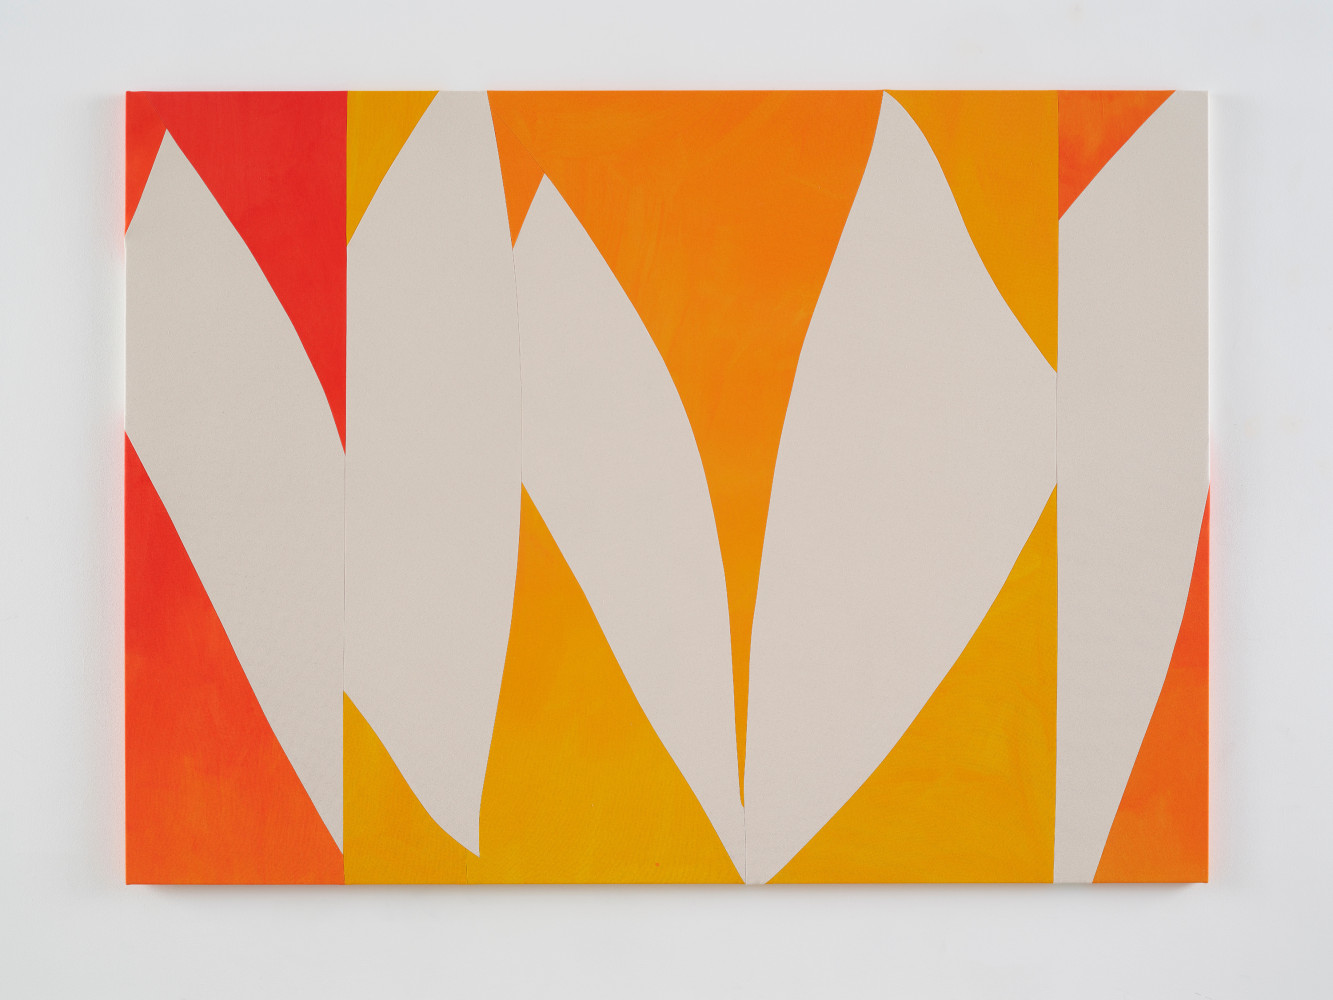 Sarah Crowner
Hot Yellow Leaf Legs, 2023
Acrylic on canvas, sewn
70 x 96 inches
(177.8 x 243.8 cm)